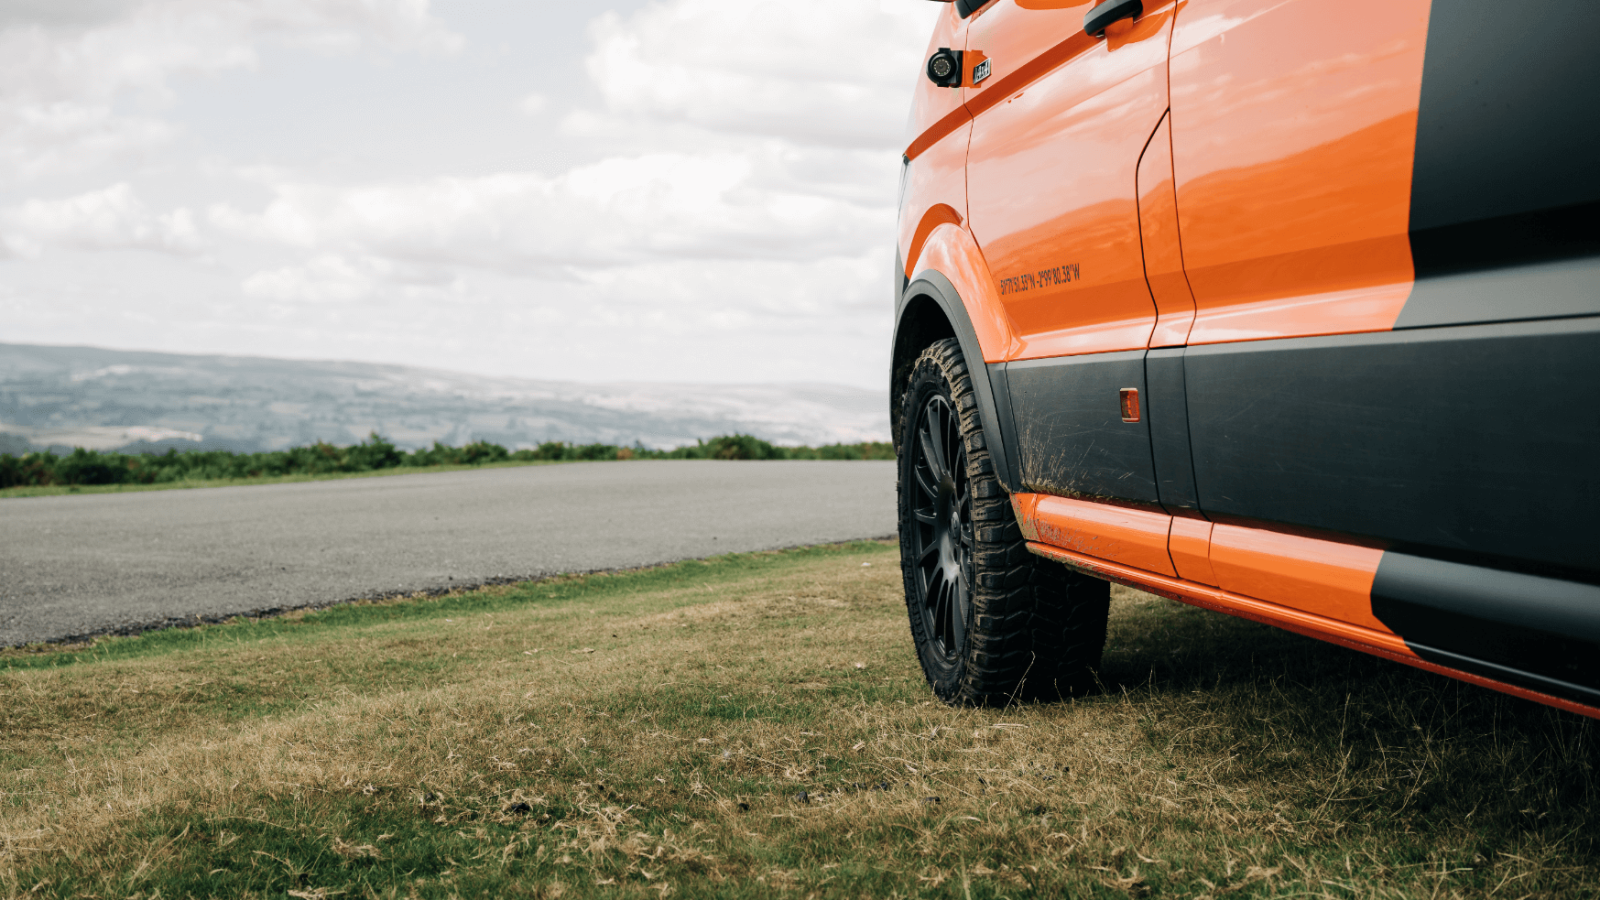 Close-up of a brand design bright orange van parked on the roadside, overlooking a scenic landscape with lush greenery and a cloudy sky in the background.